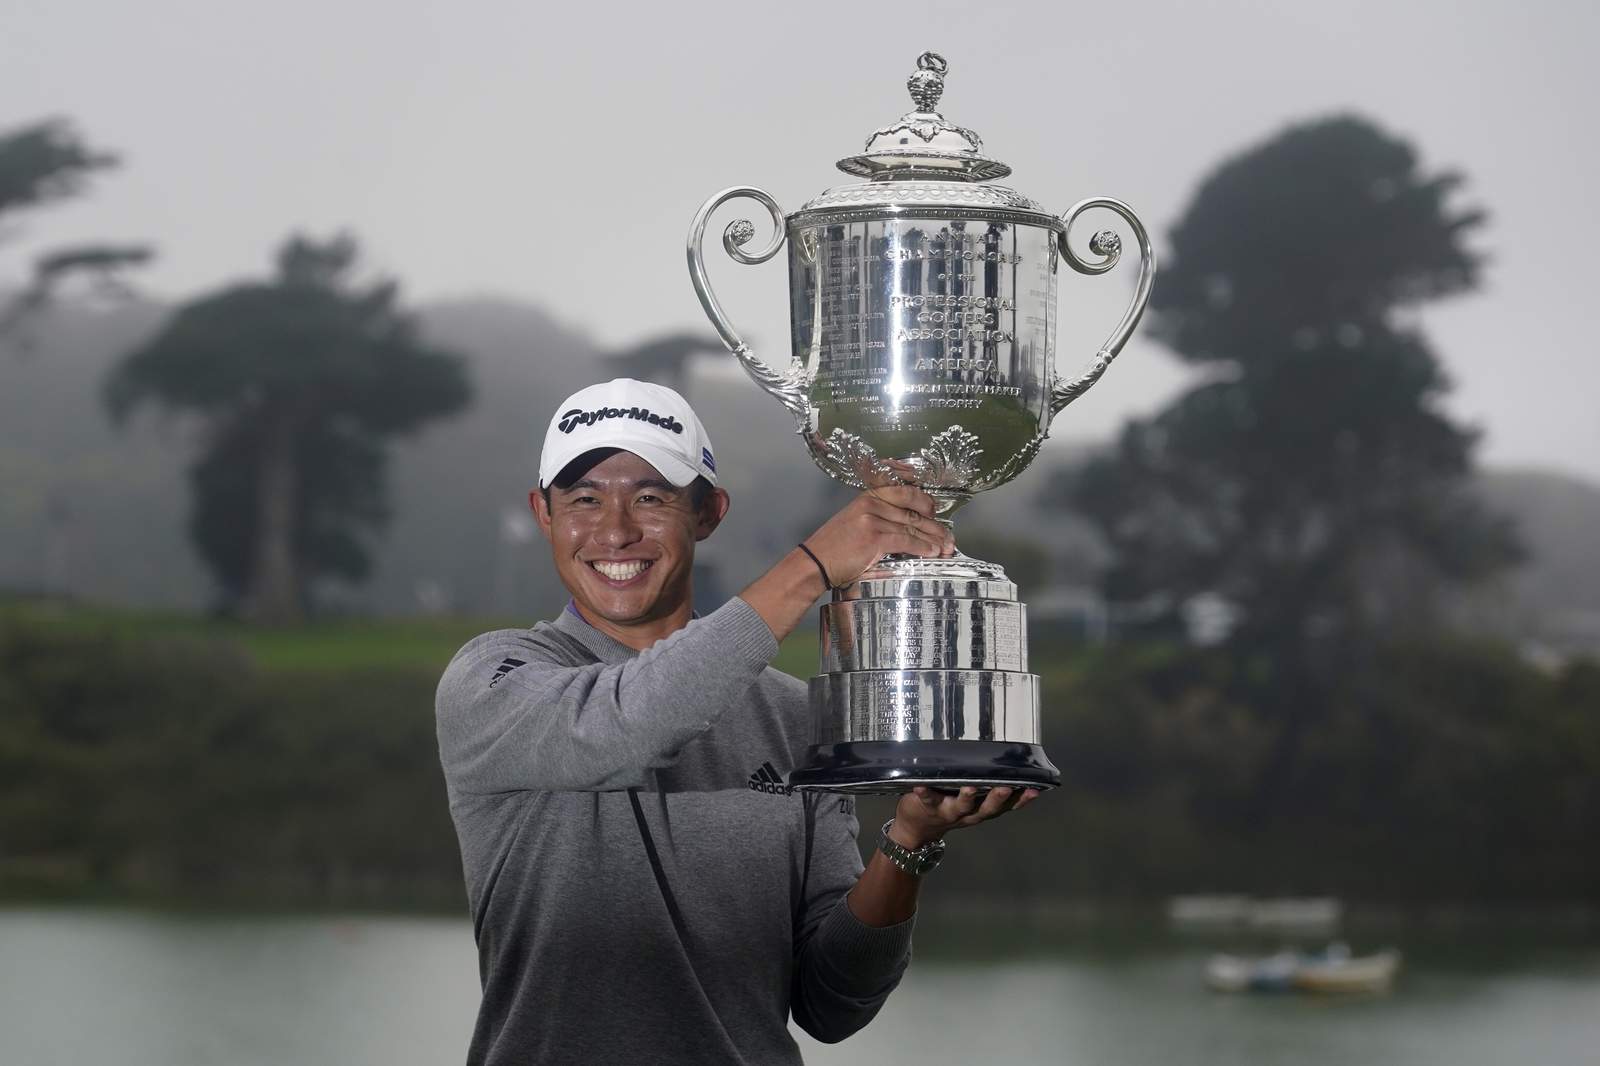 New PGA champion Morikawa's toughest moment came after round